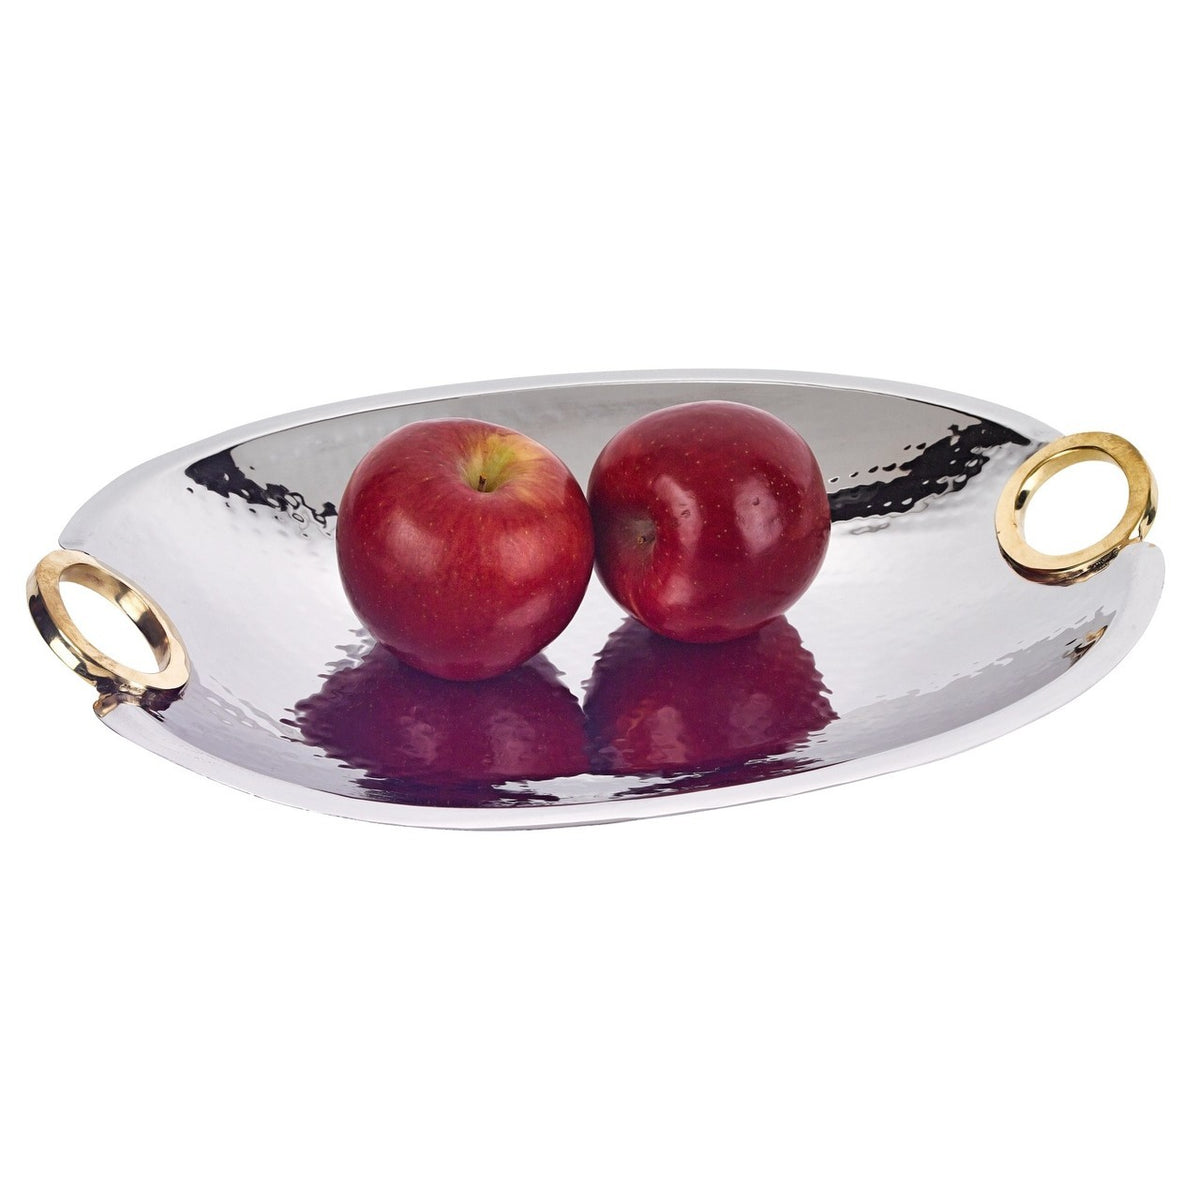 Rings Stainless Steel and Brass Oval Bowl